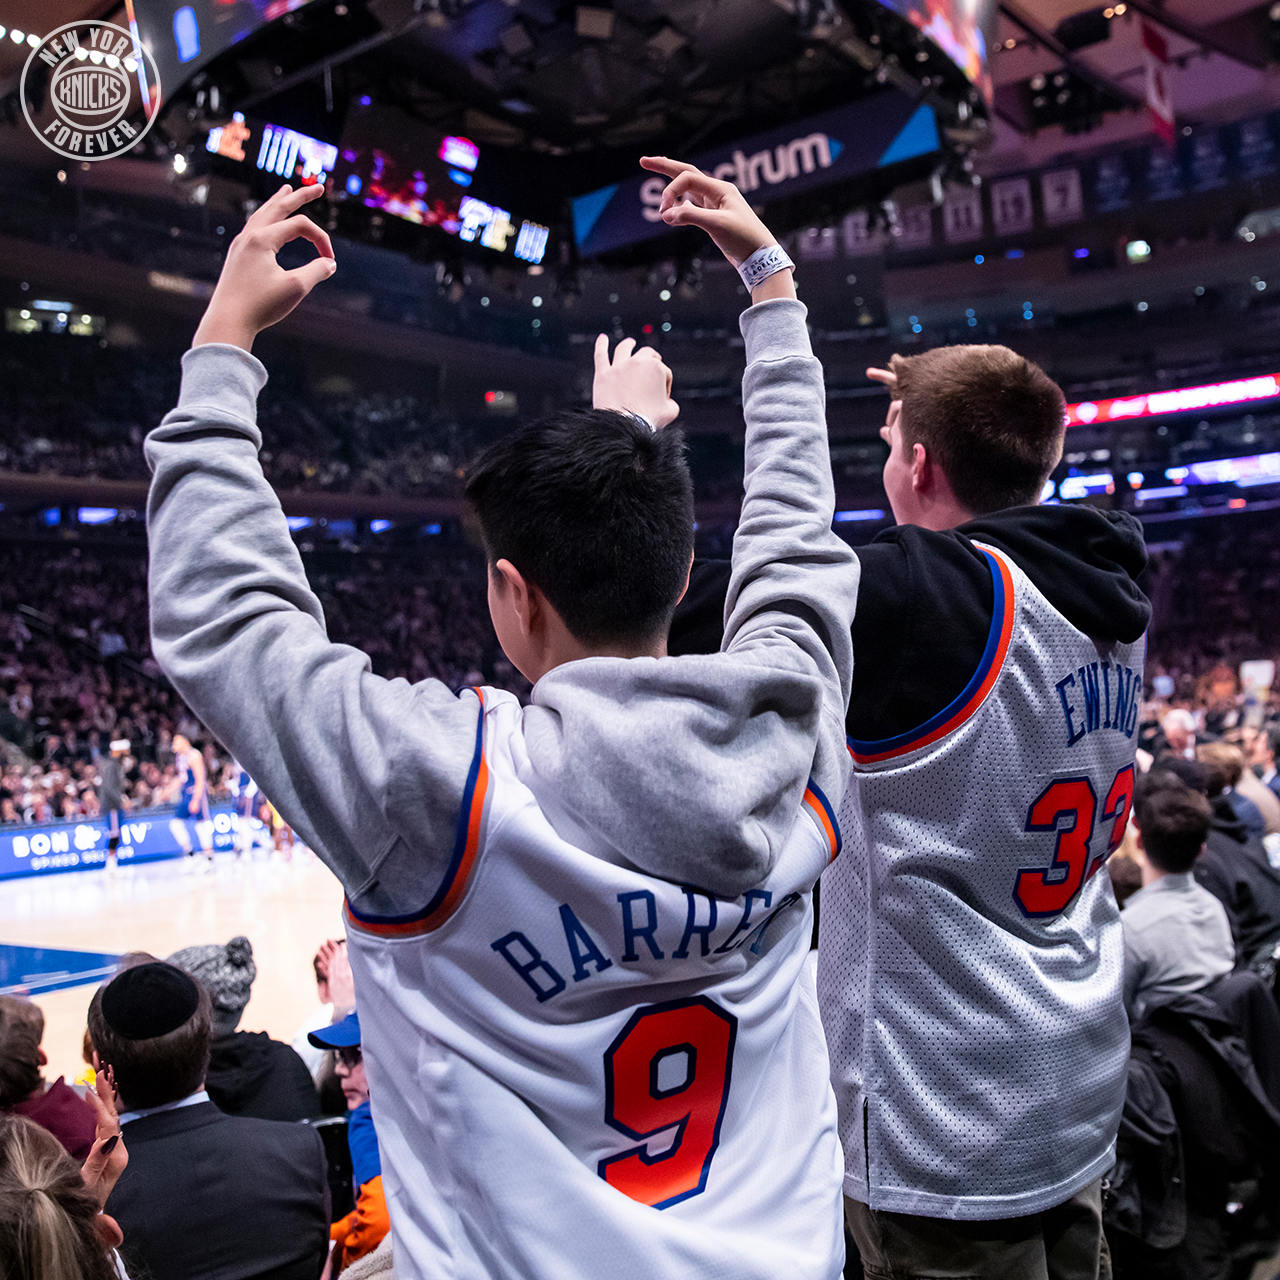 NEW YORK KNICKS on X: If we could bring ☝️ jersey back next